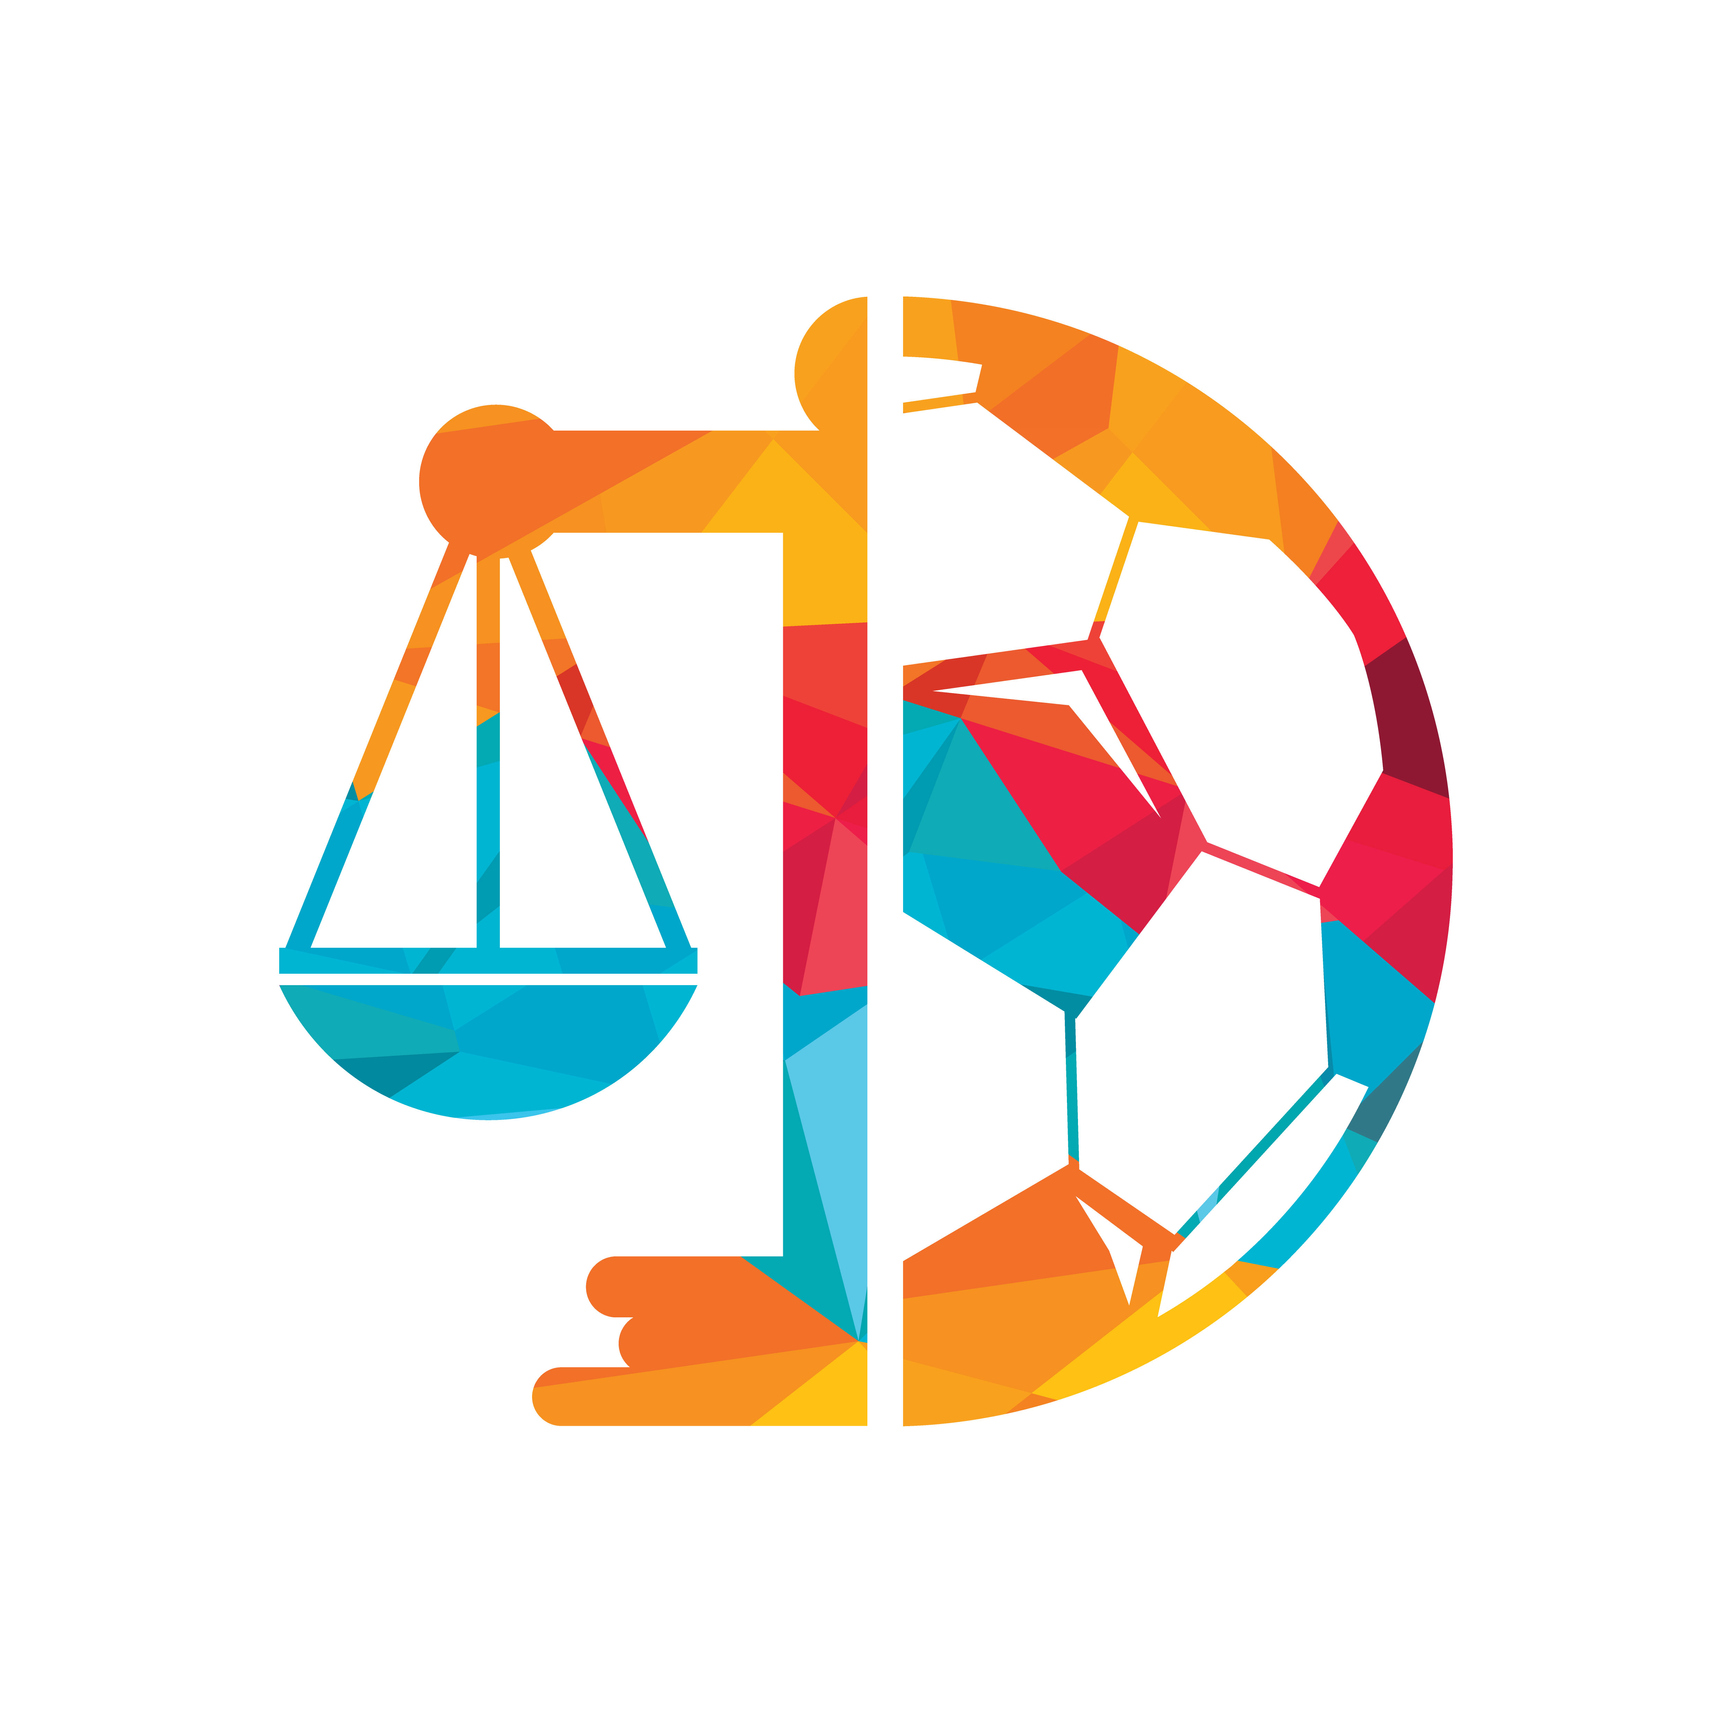 Is Being an Ardent Supporter of a Football Club a Characteristic Protected by Equality Law?